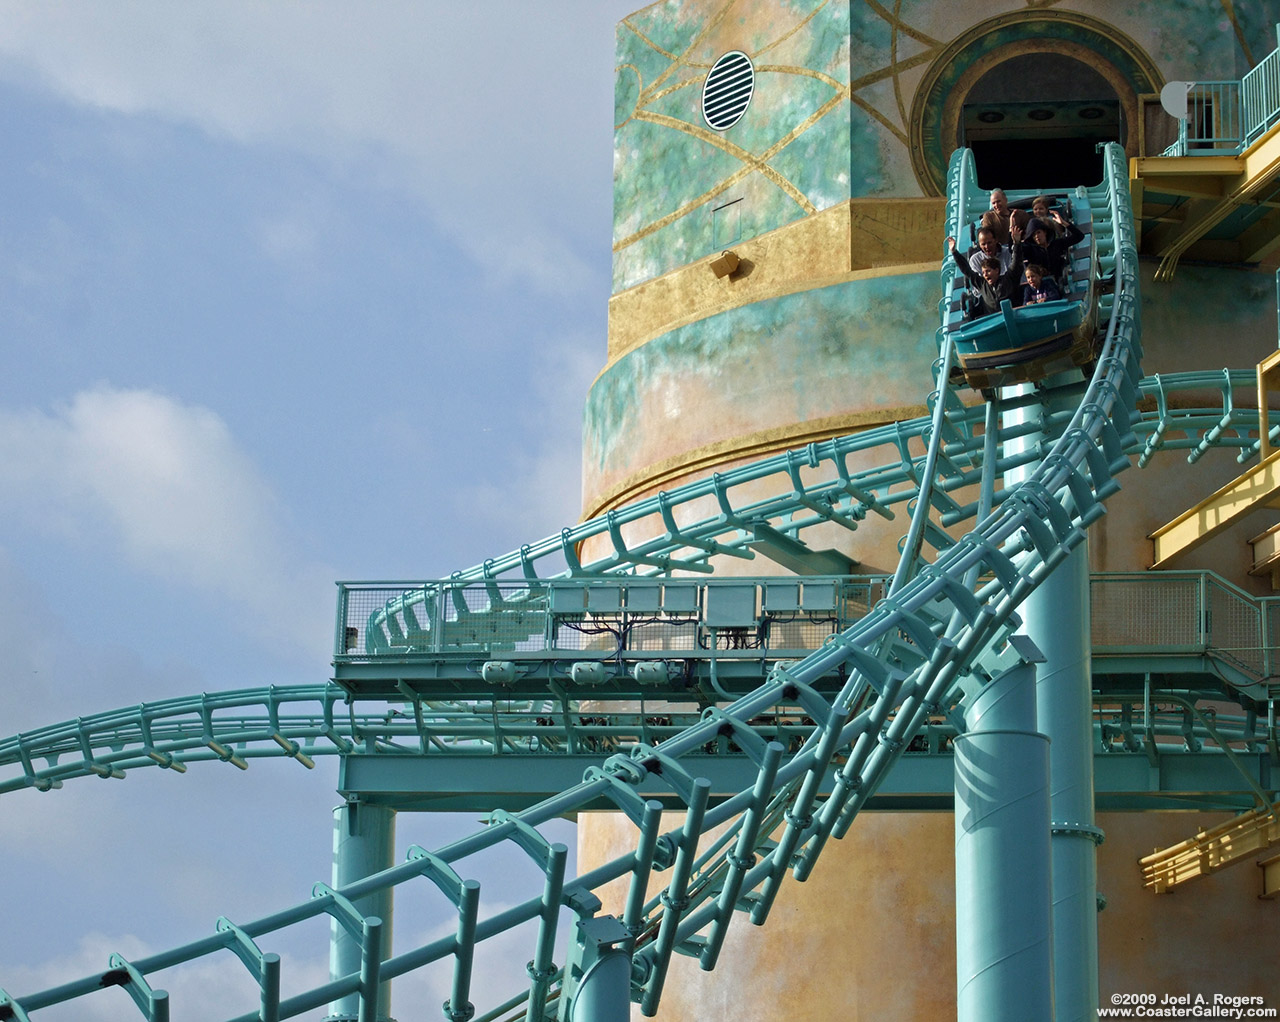 The big drop on the roller coaster portion of Journey to Atlantis